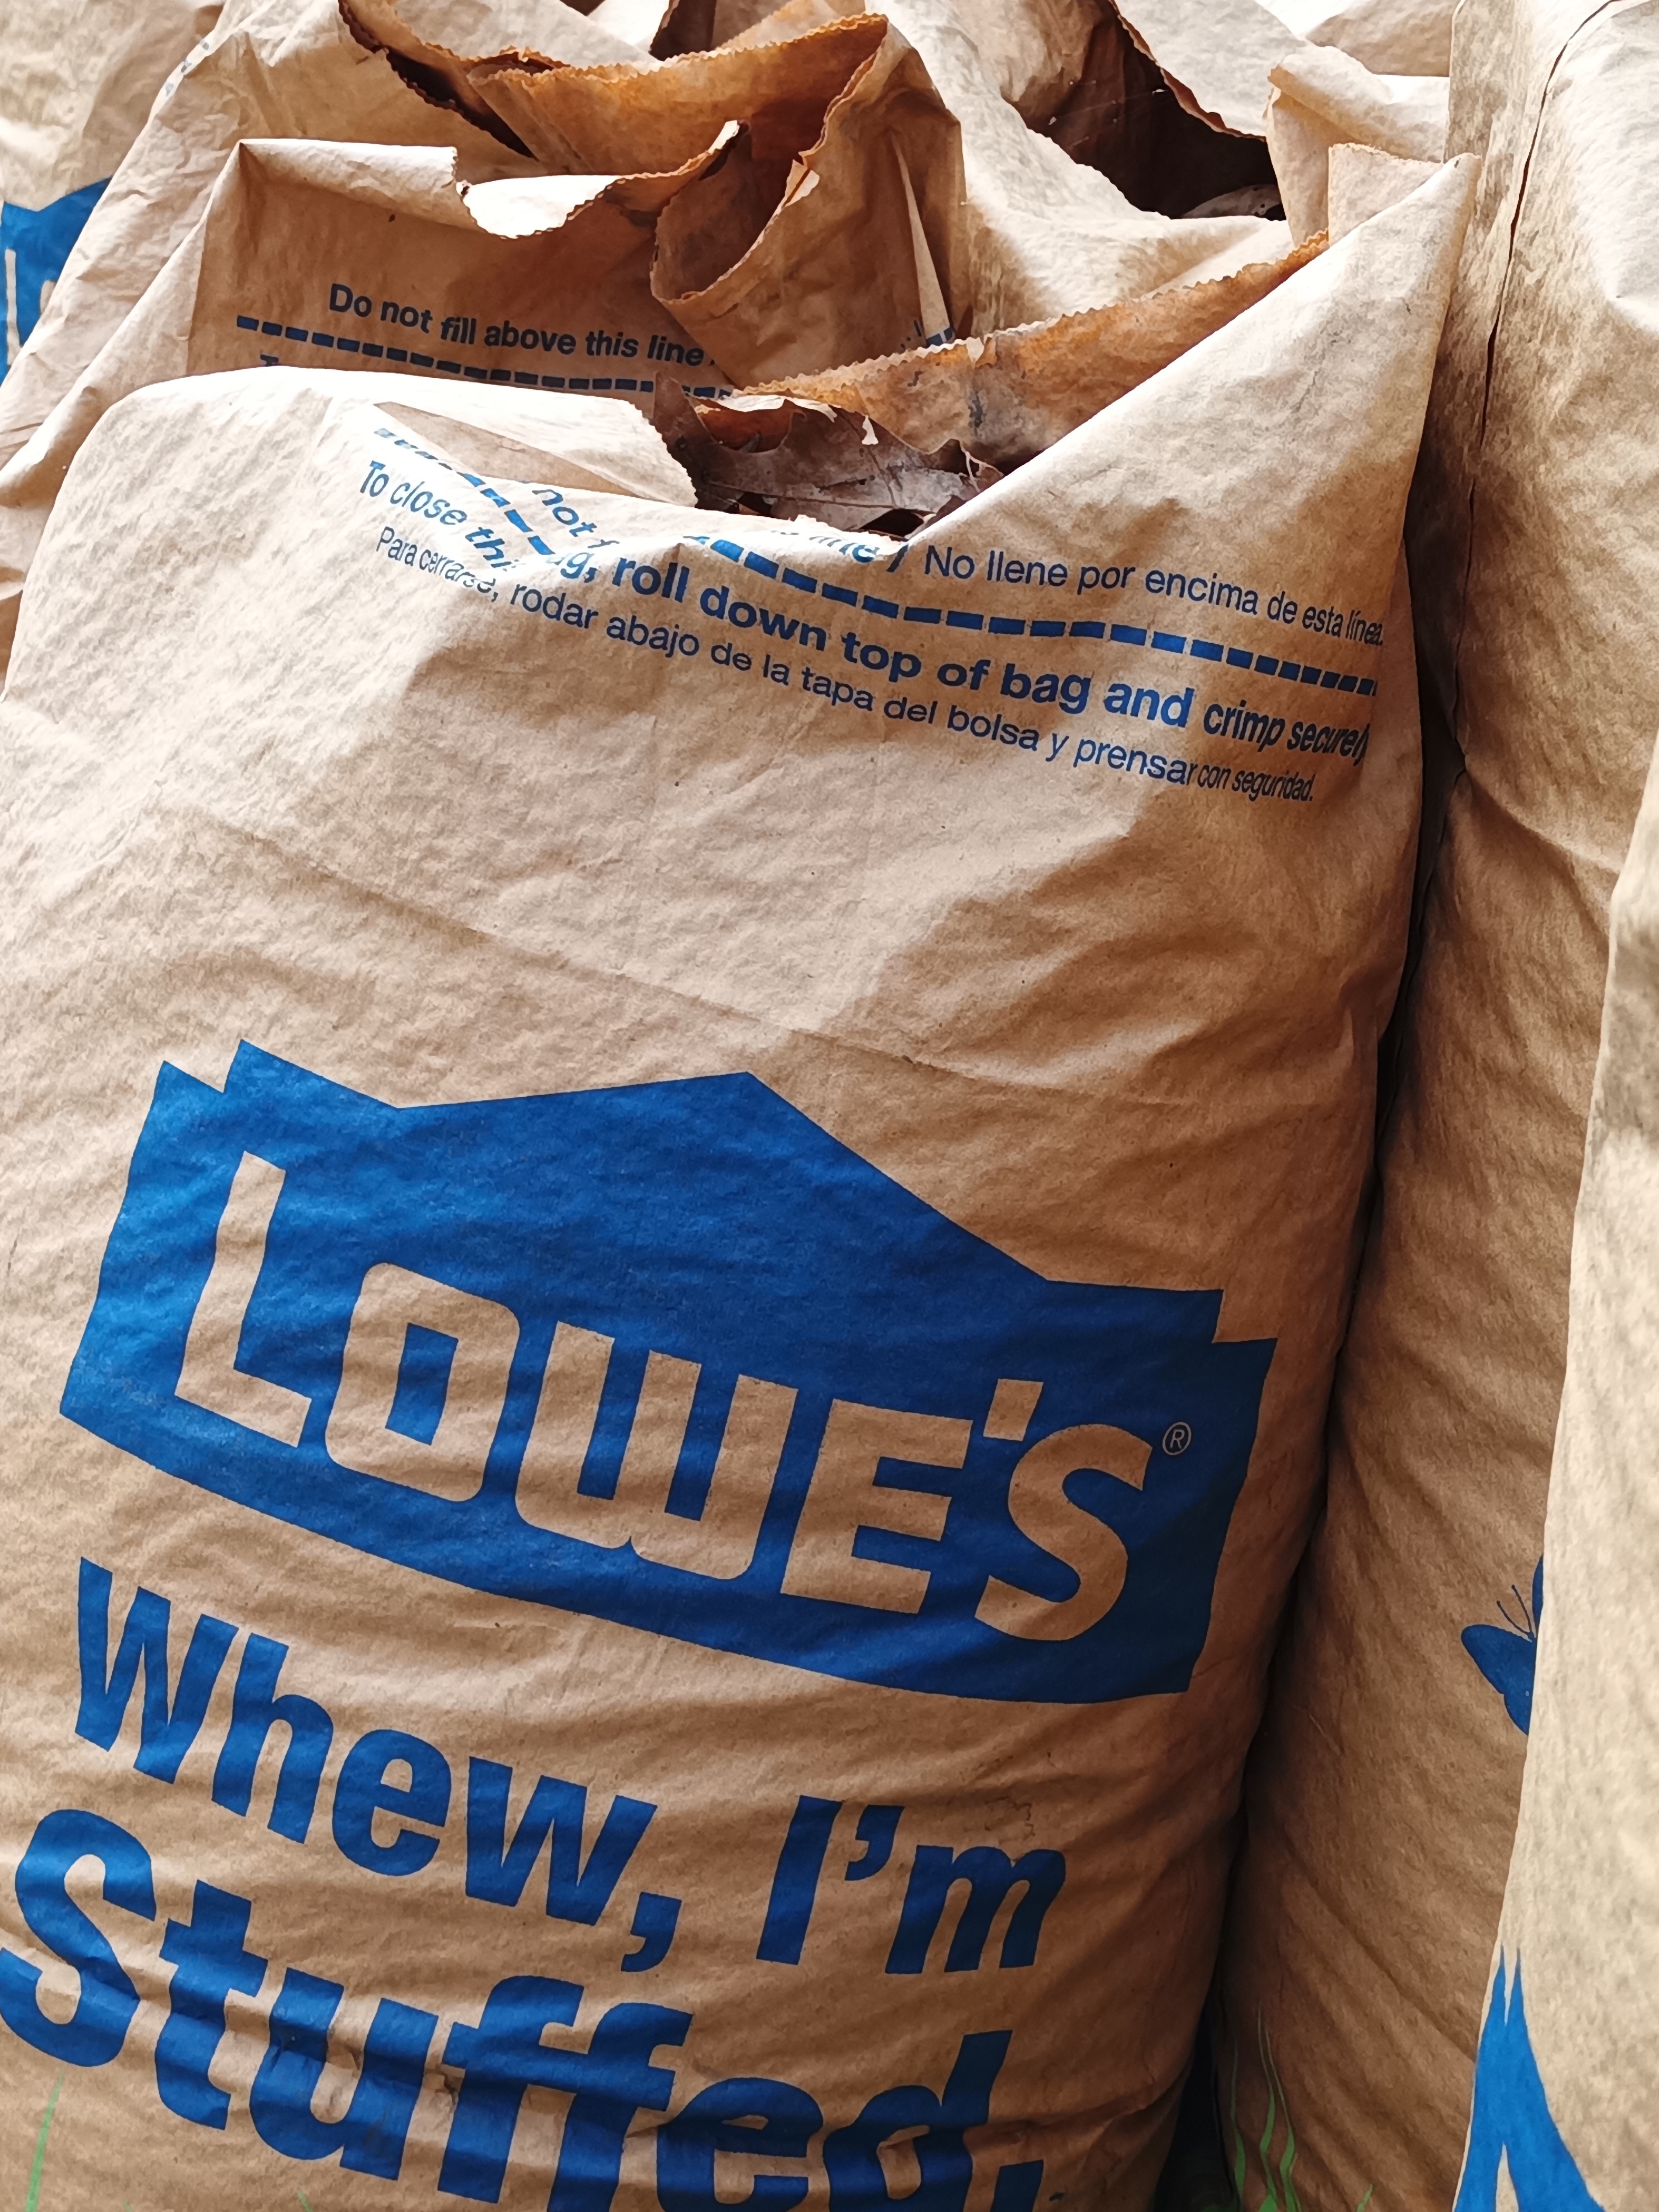 Leaf bags from Lowes